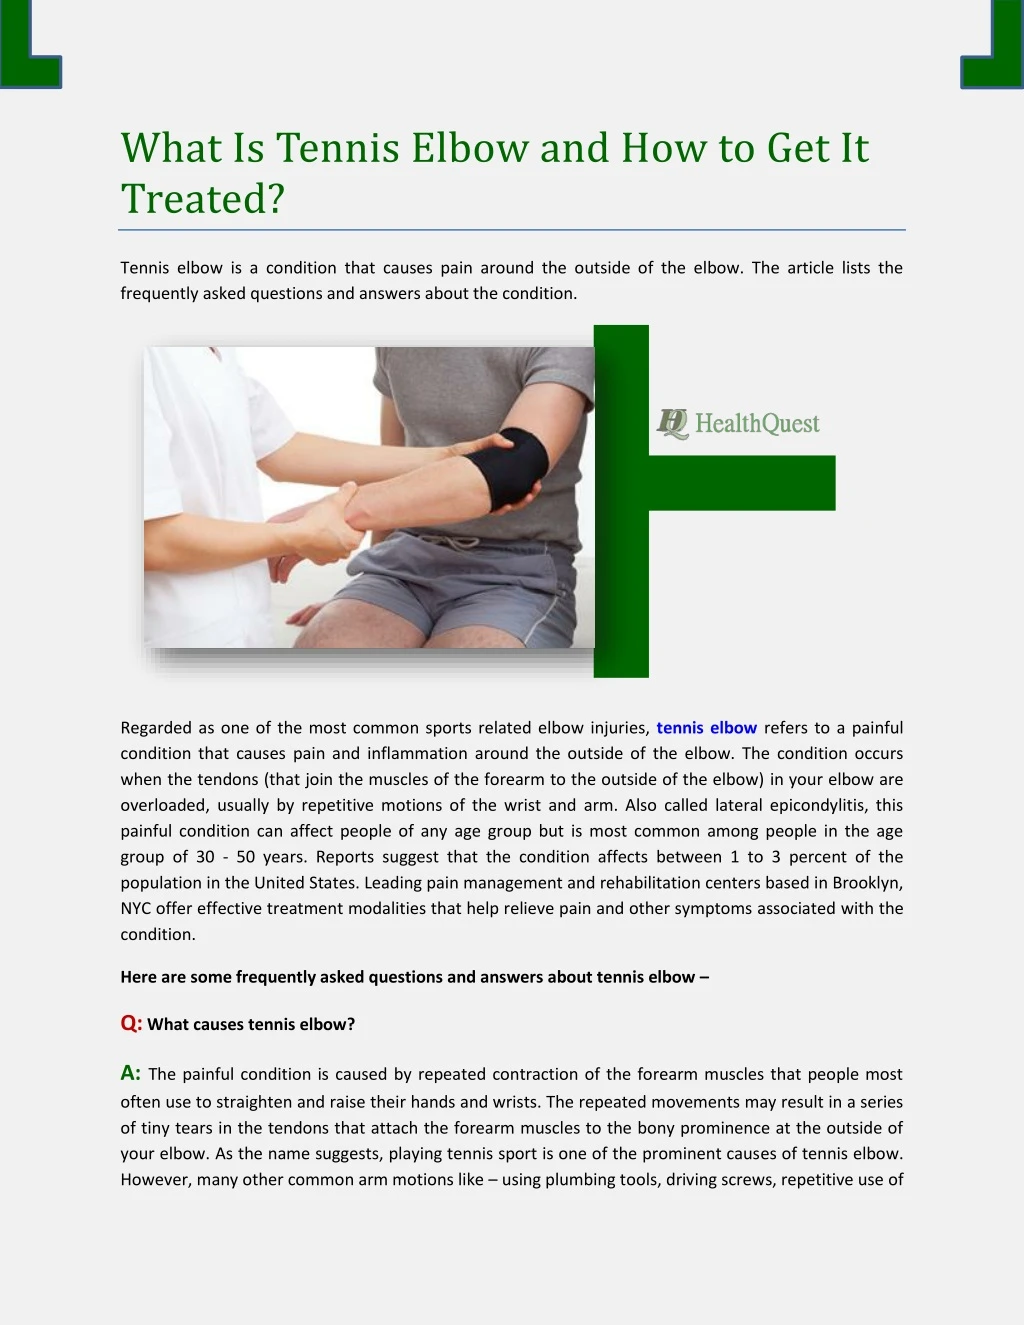 what is tennis elbow and how to get it treated